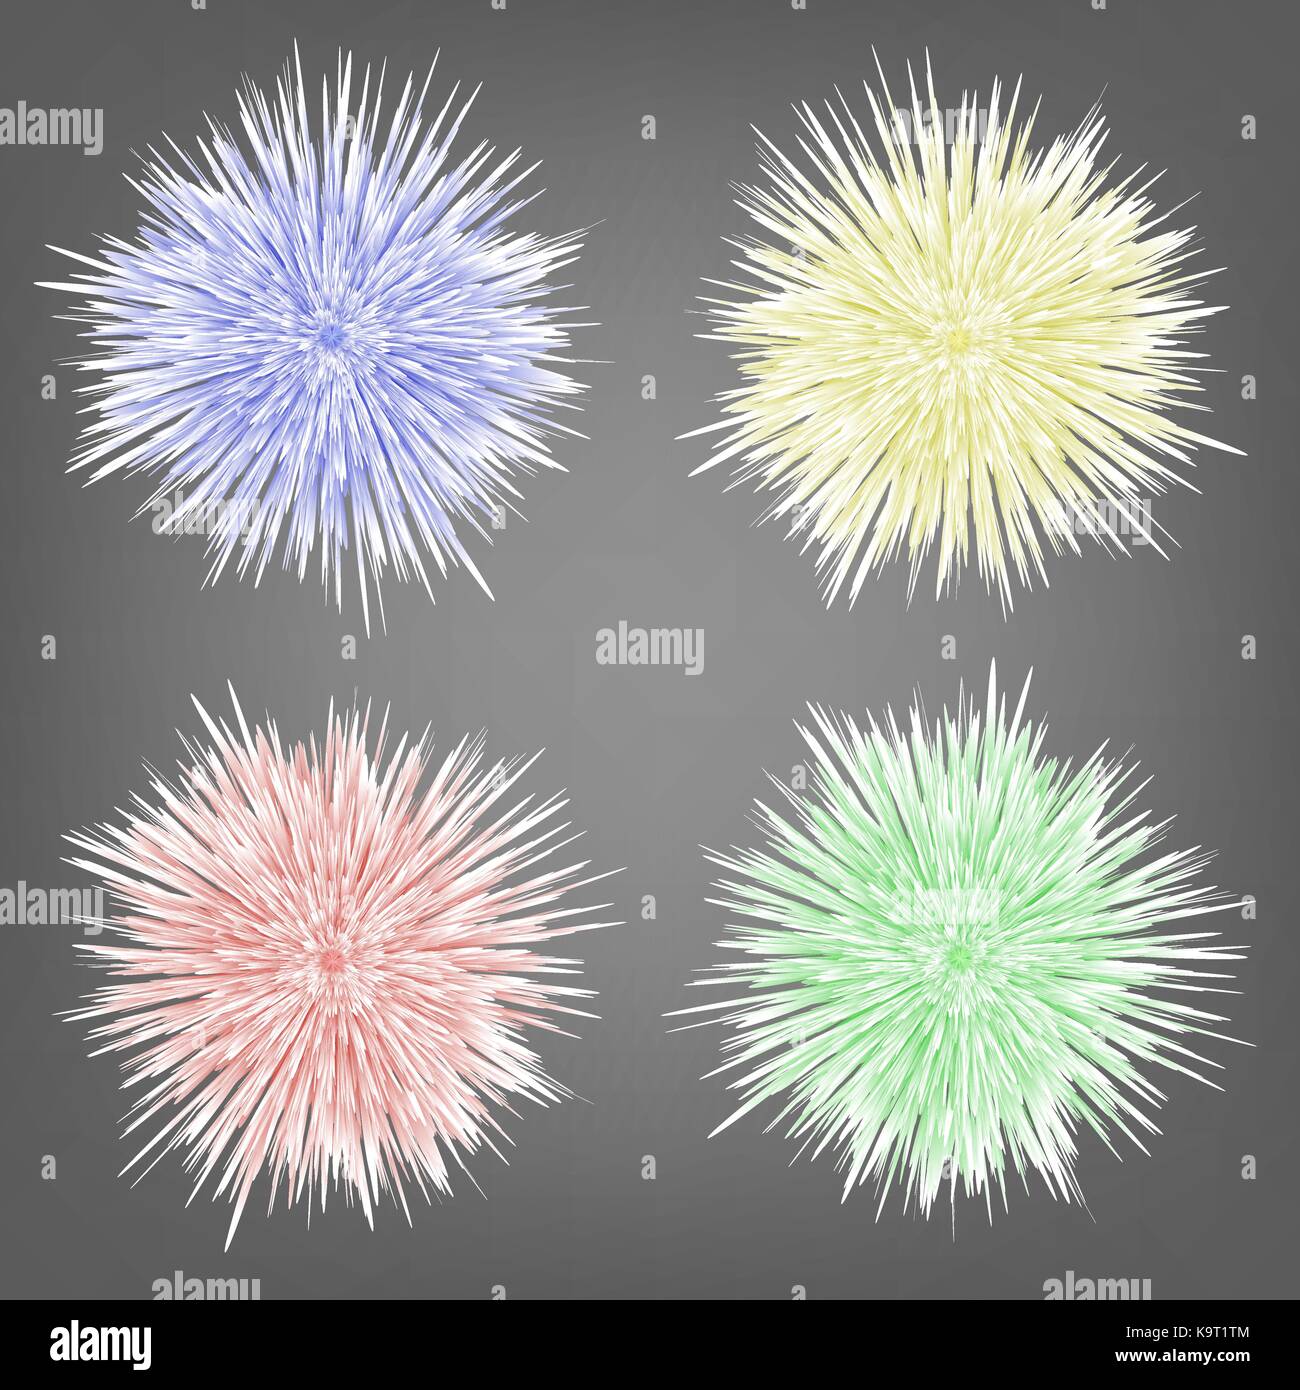 Set of Different Colorful Fur Spheres Background Stock Vector